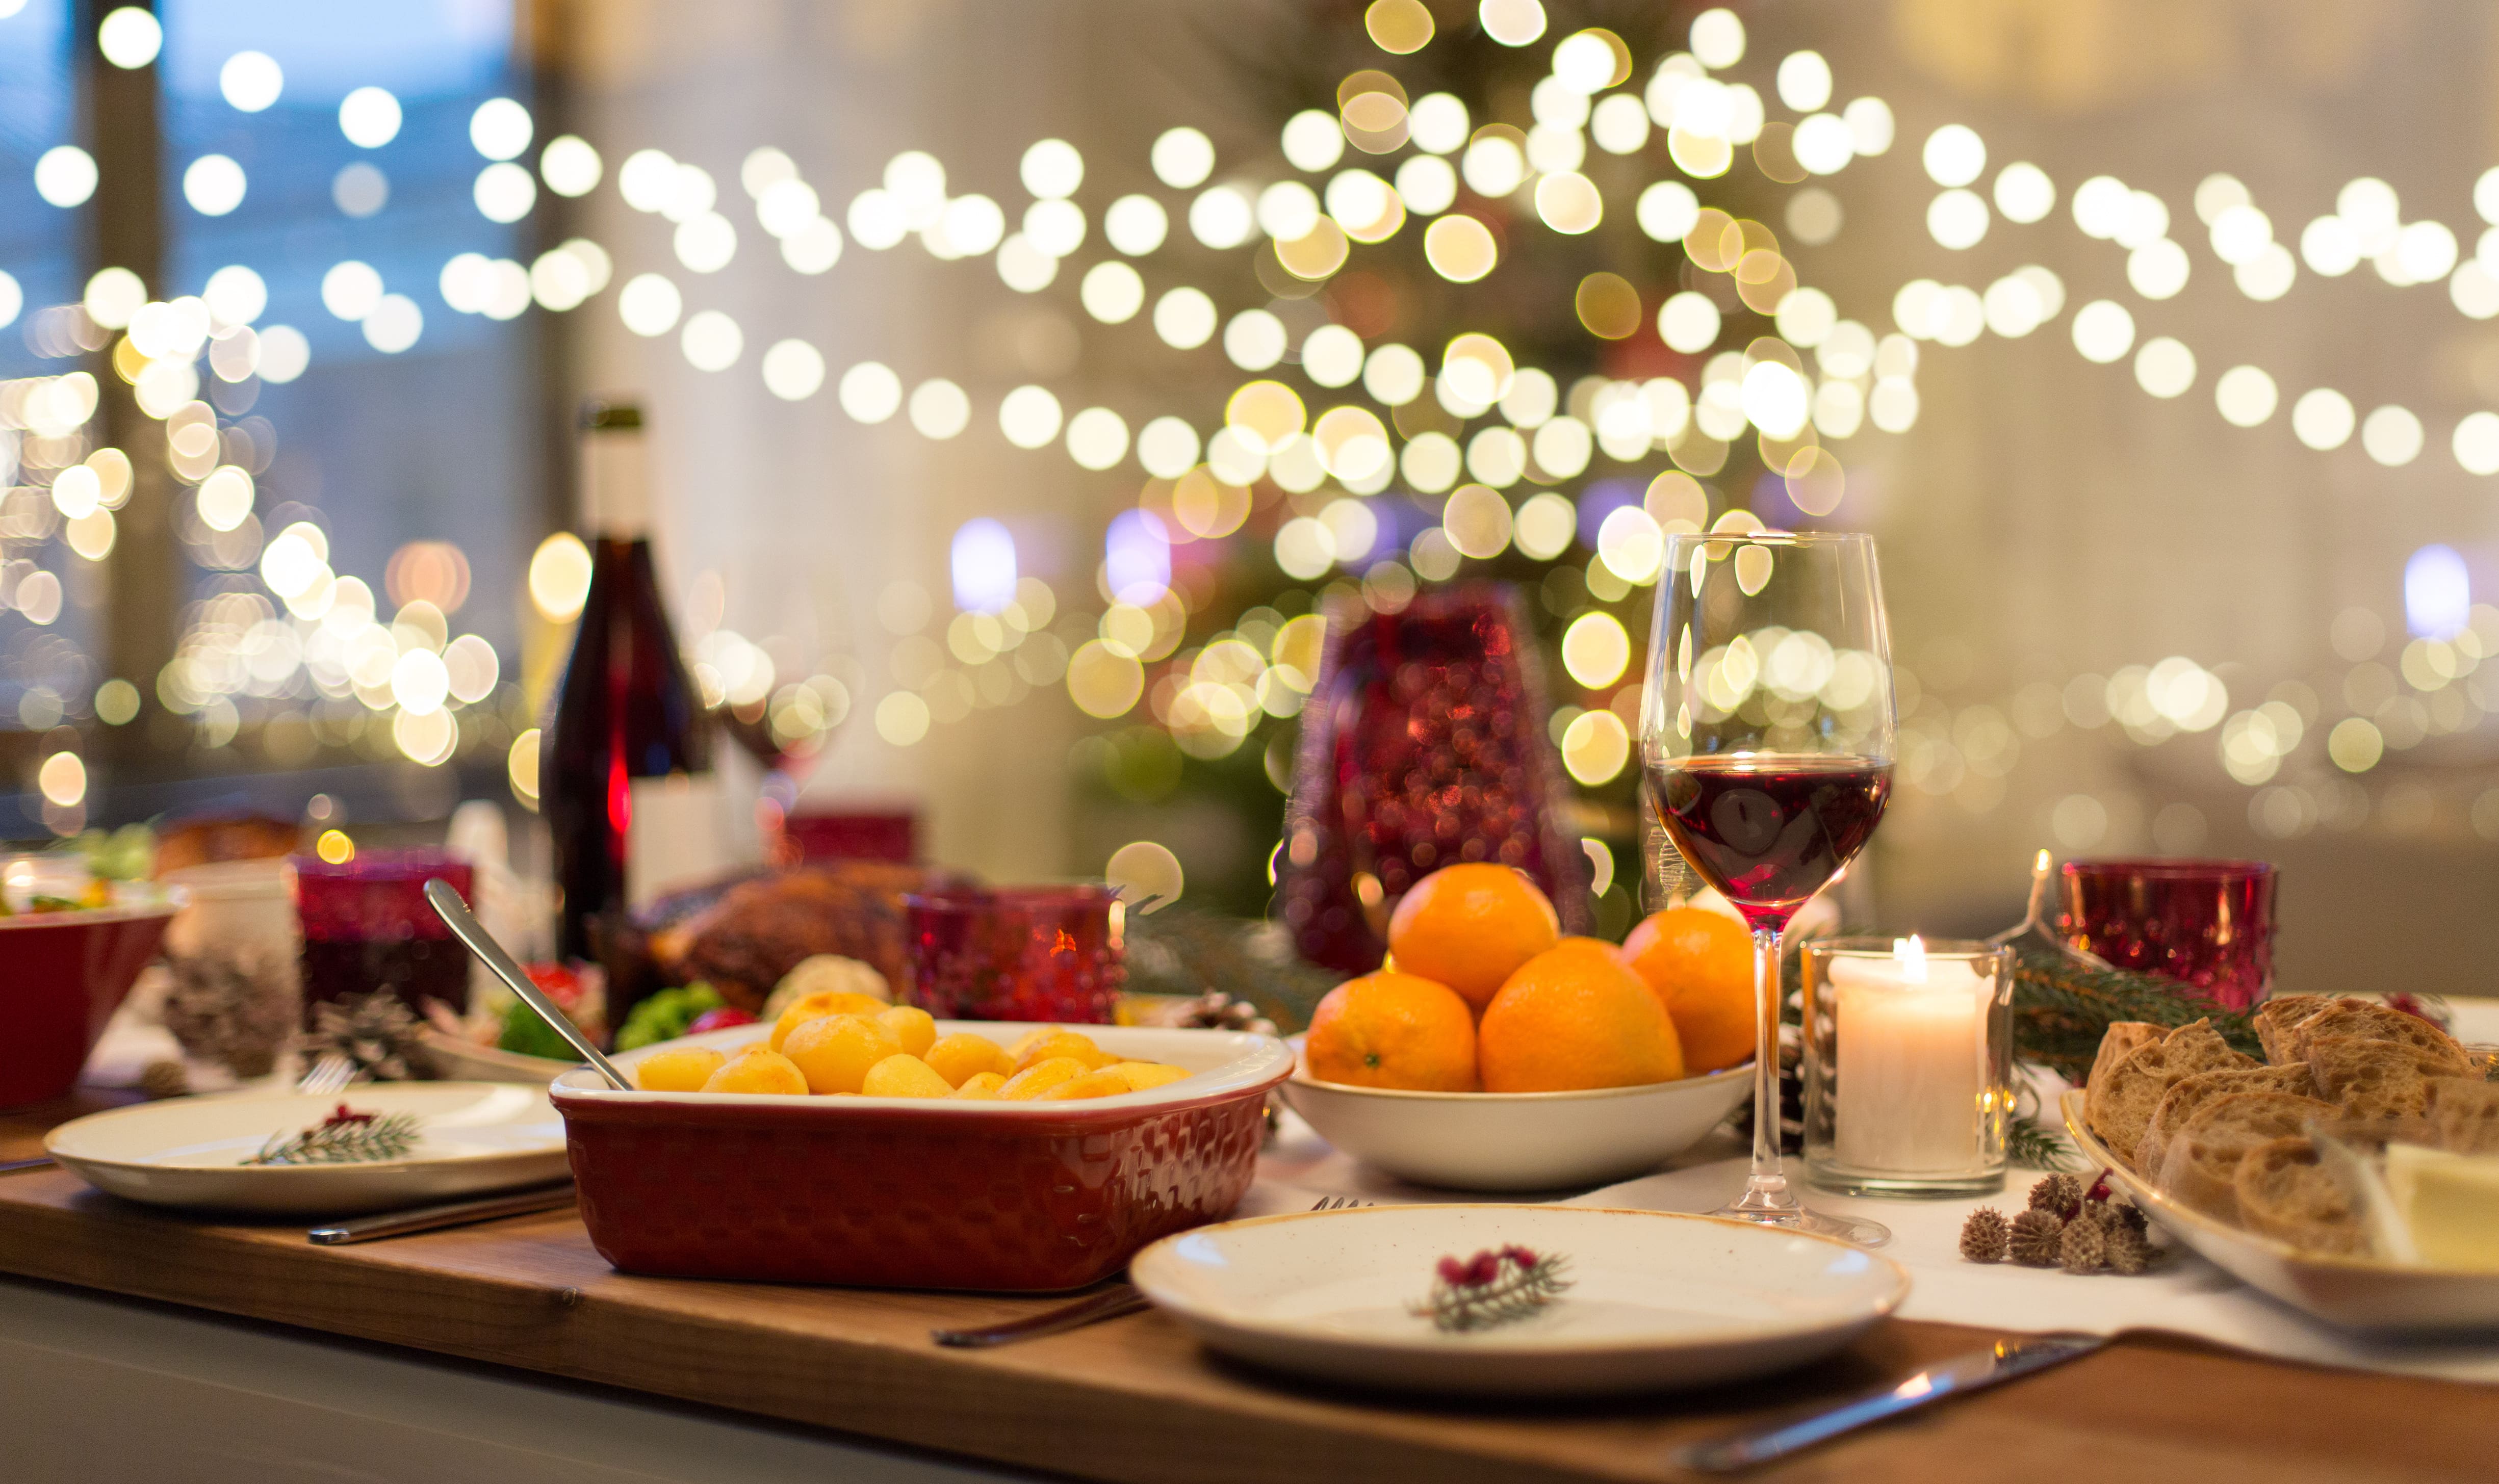 A table at Christmas bursting with festive flavours and adorned with fairy lights